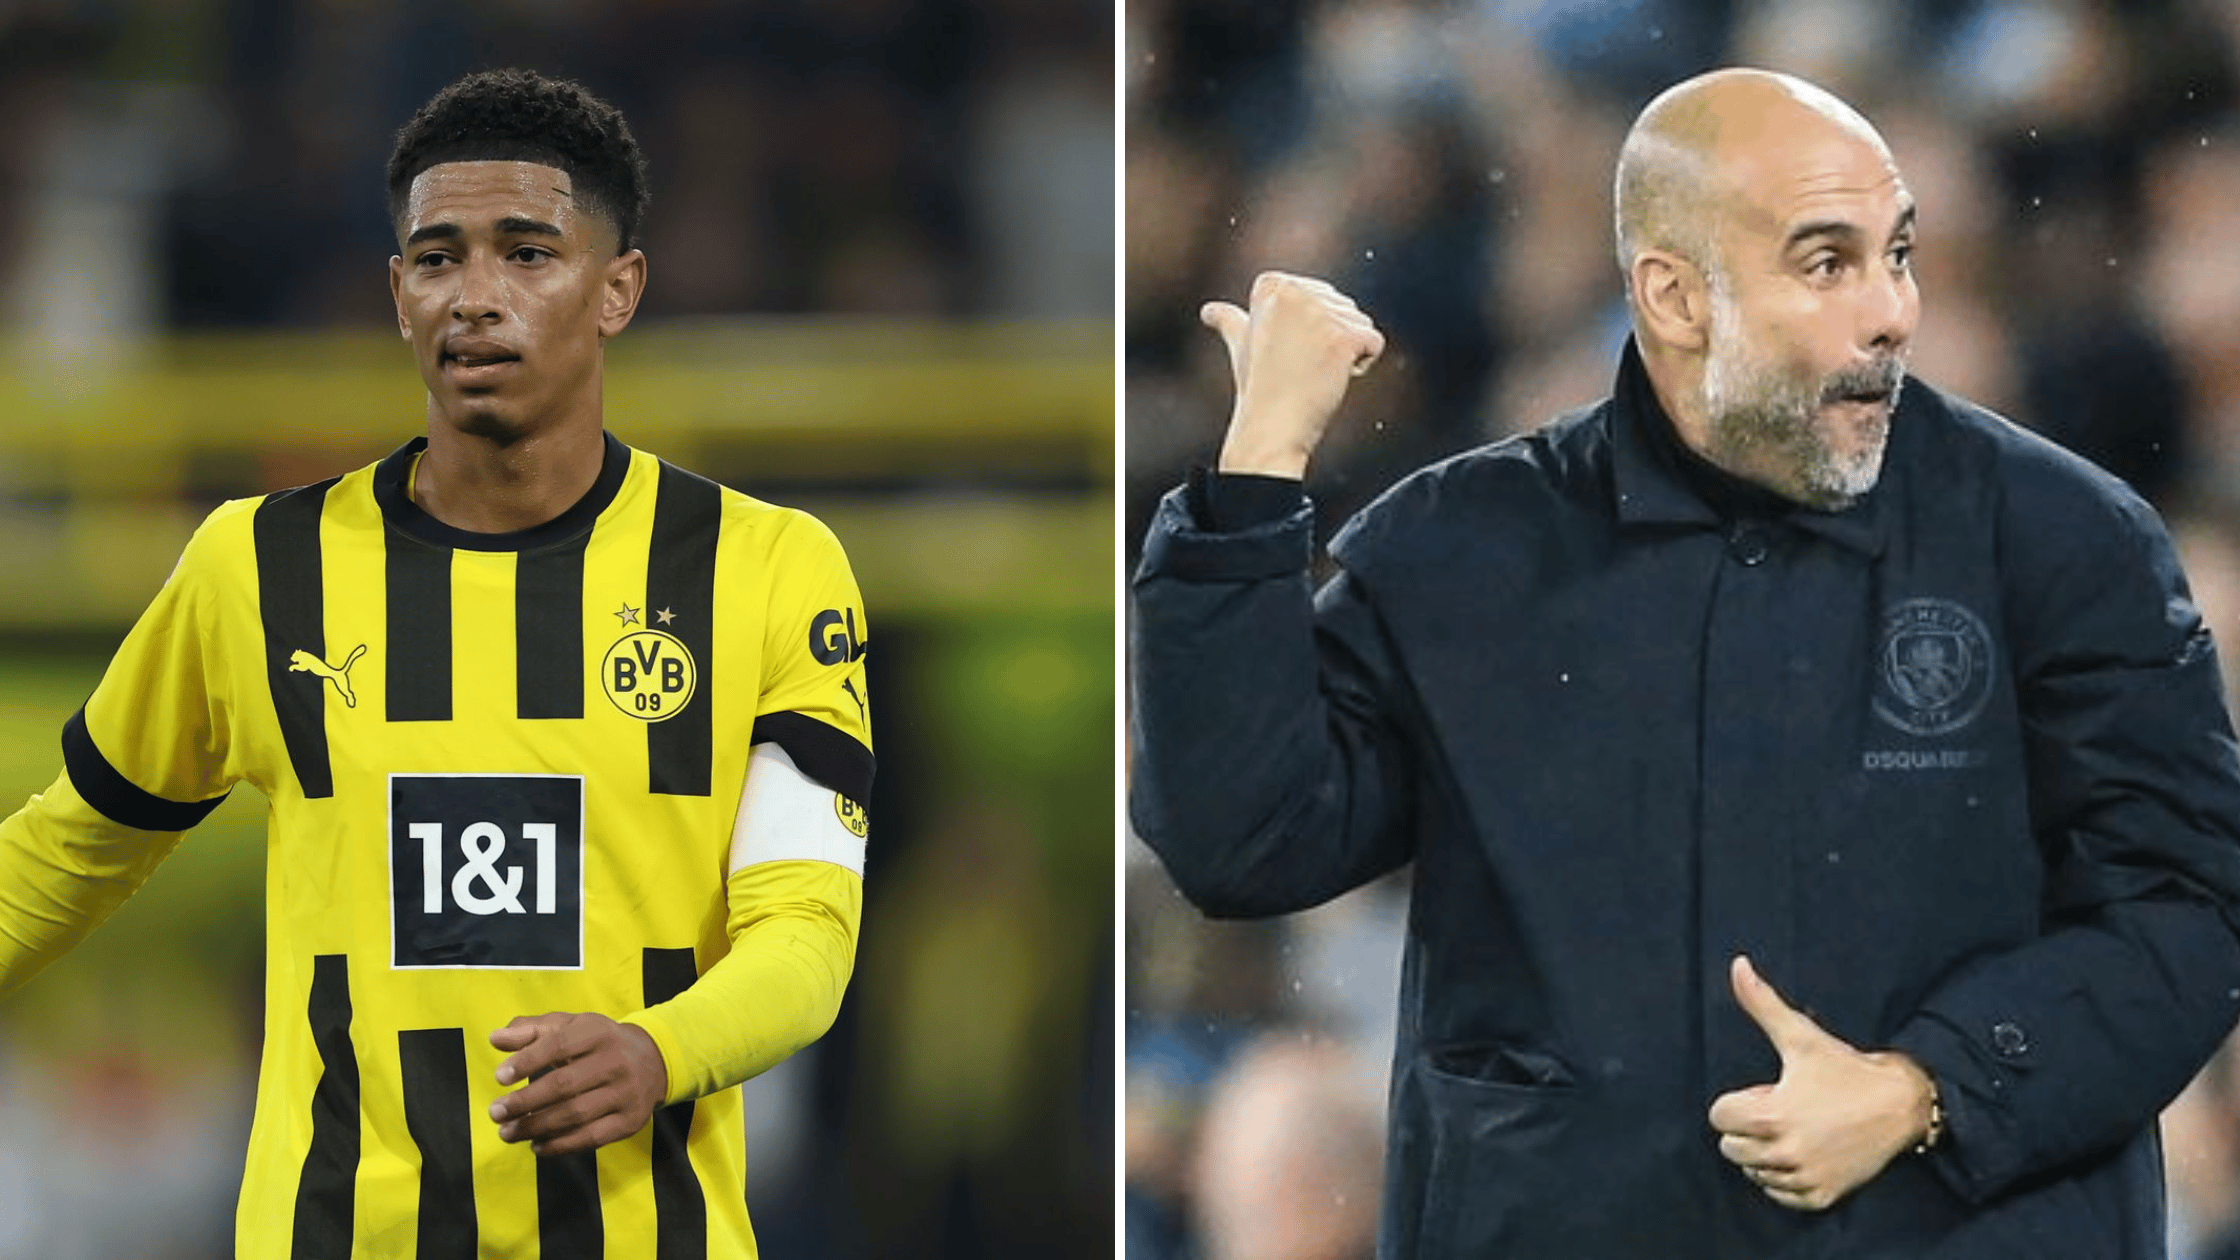 UCL: What Guardiola Said About Jude Bellingham Ahead Of Dortmund Clash